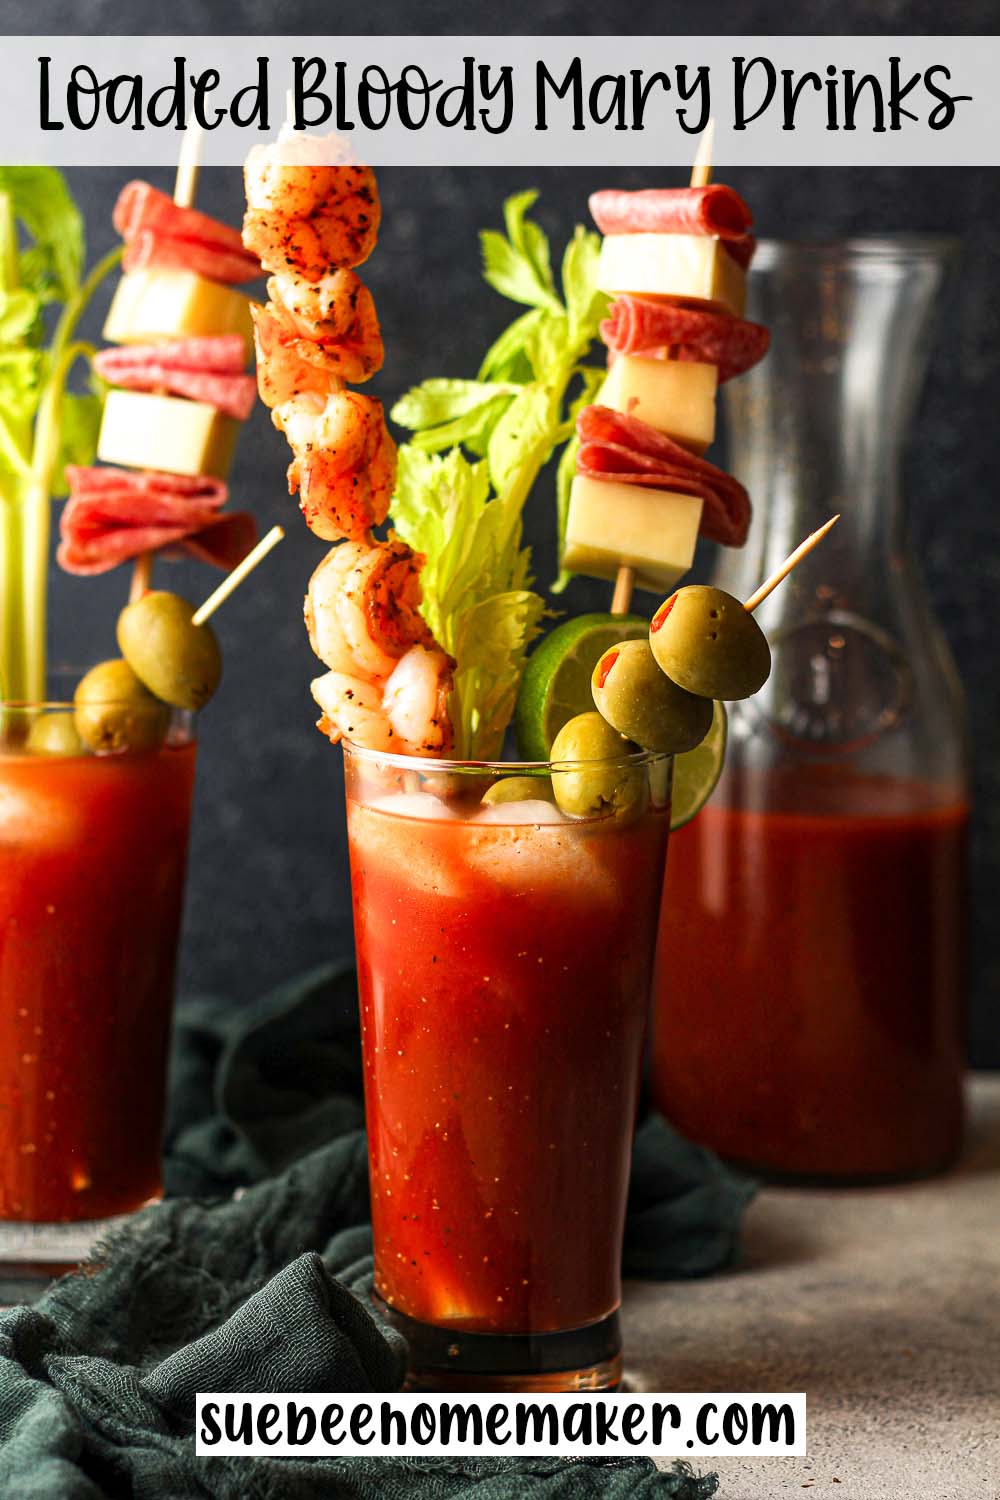 Side view of two loaded Bloody Mary drinks with garnishes.